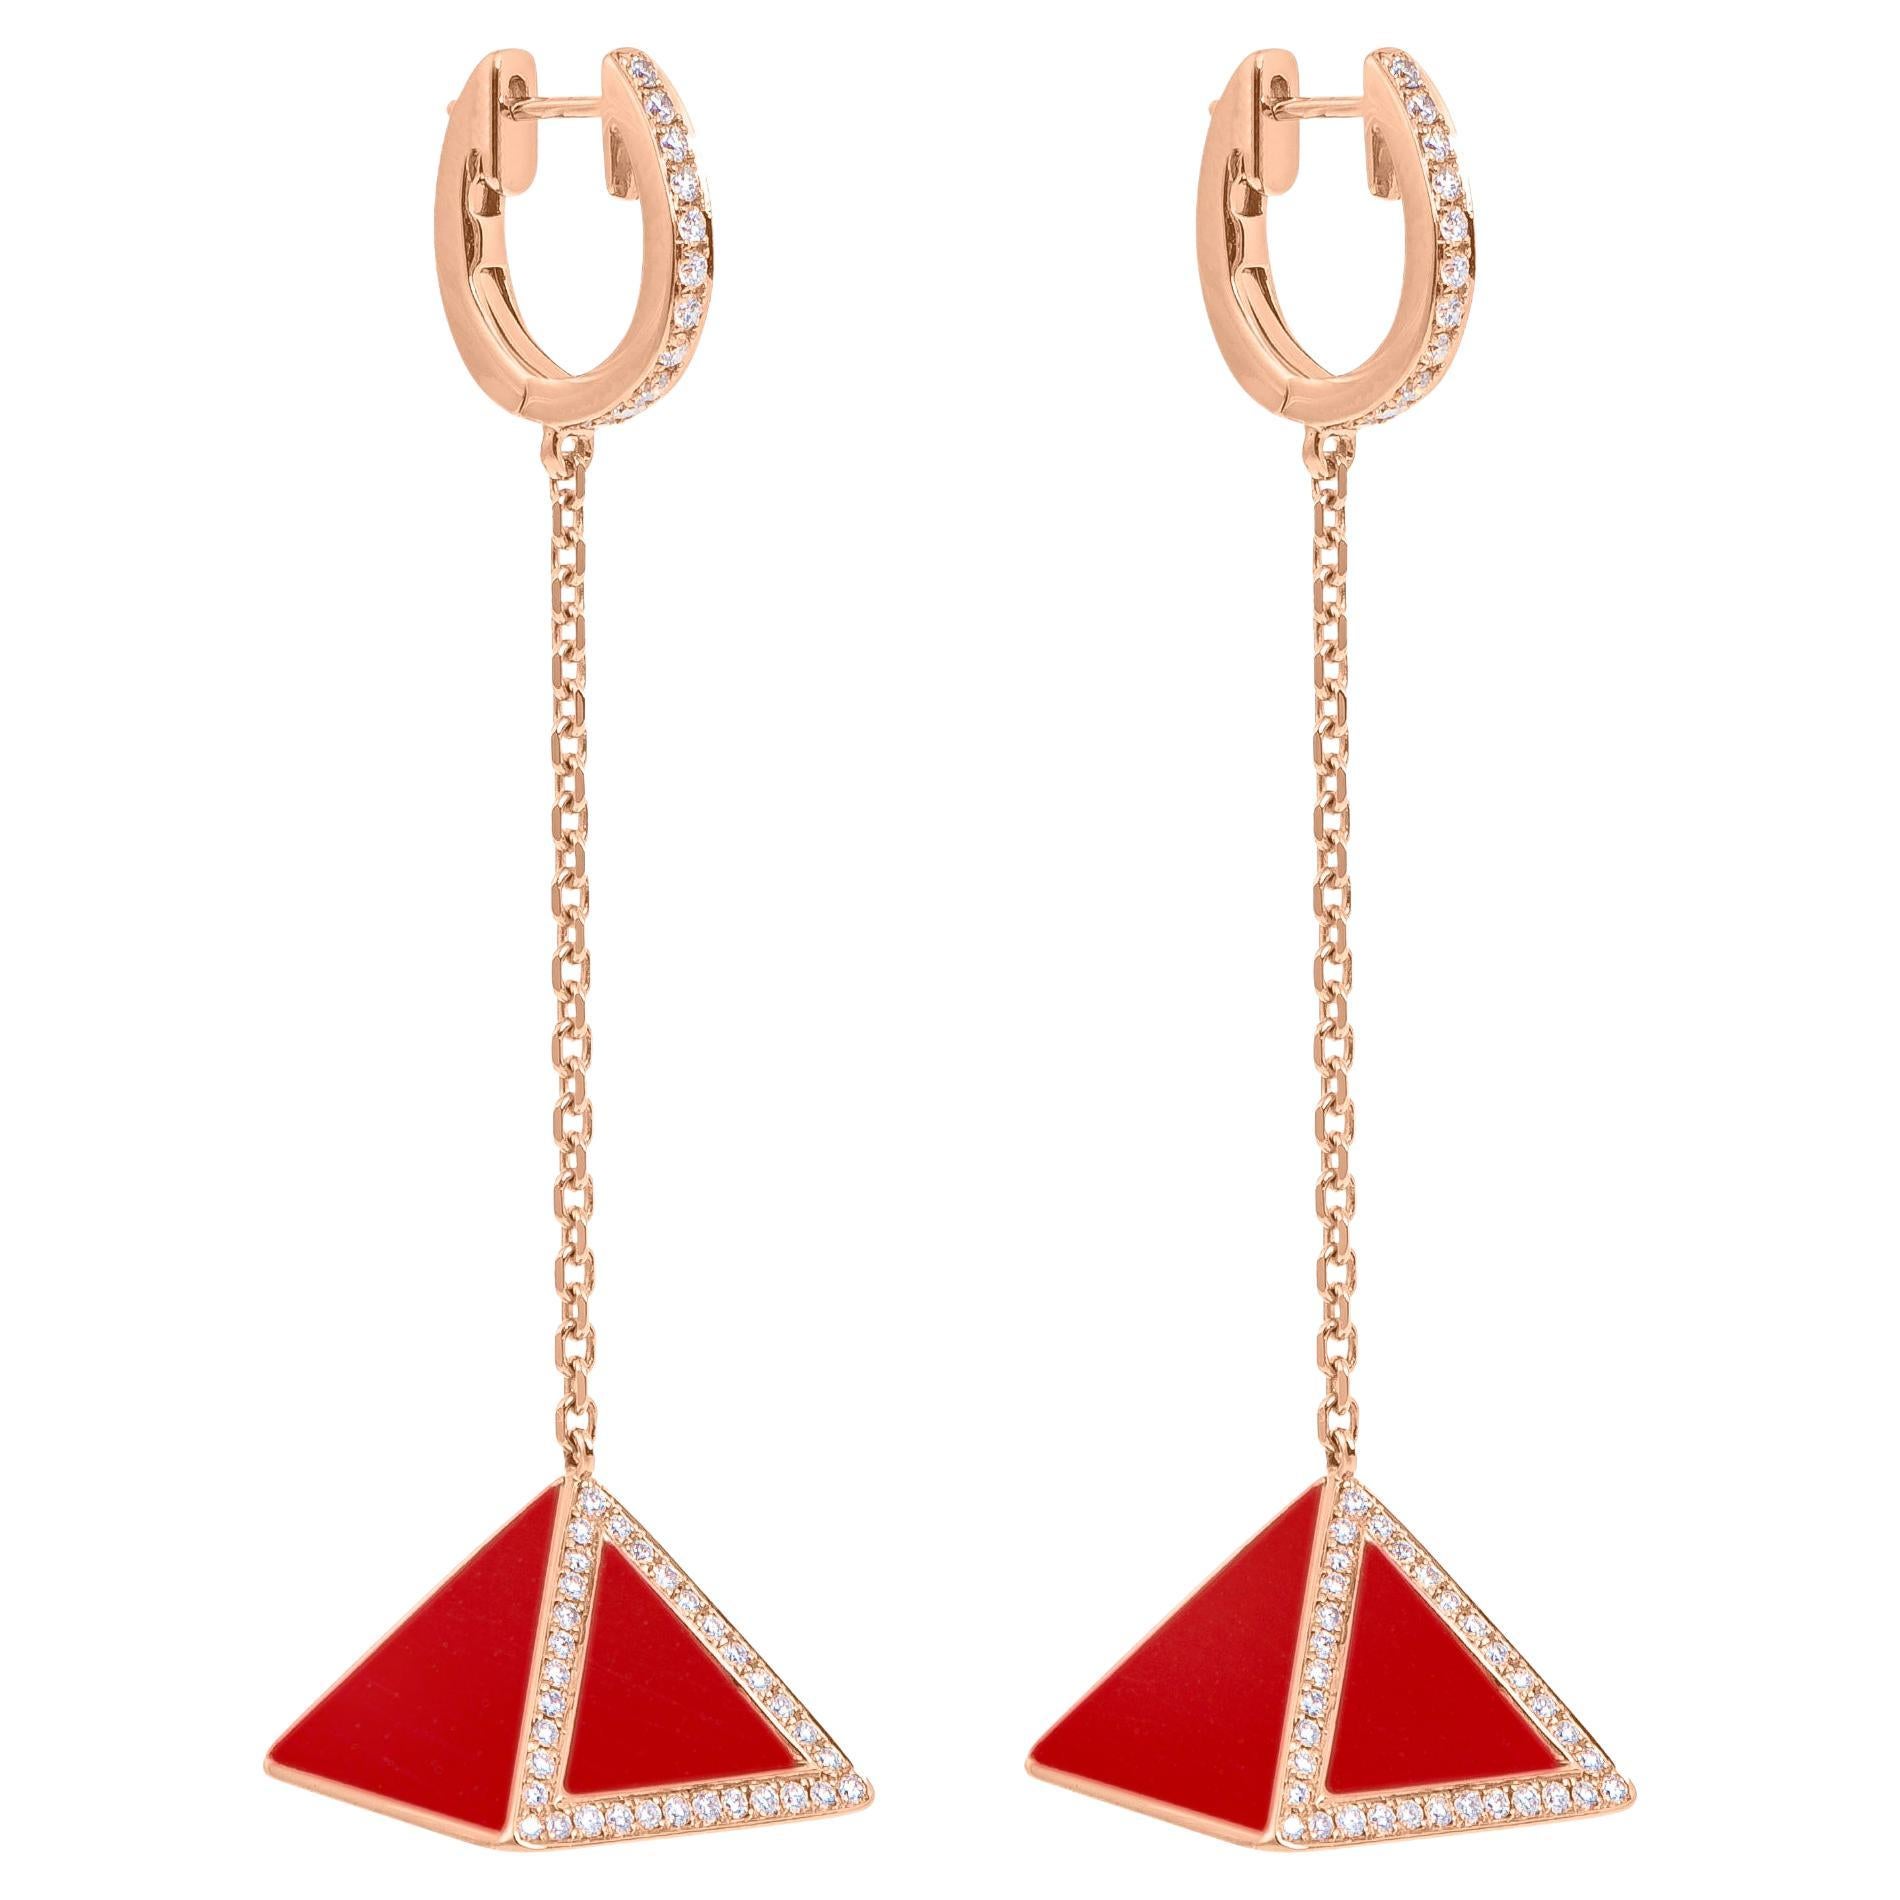 Tetra Tribus Earrings with Red Coral and Diamonds in 18K Rose Gold